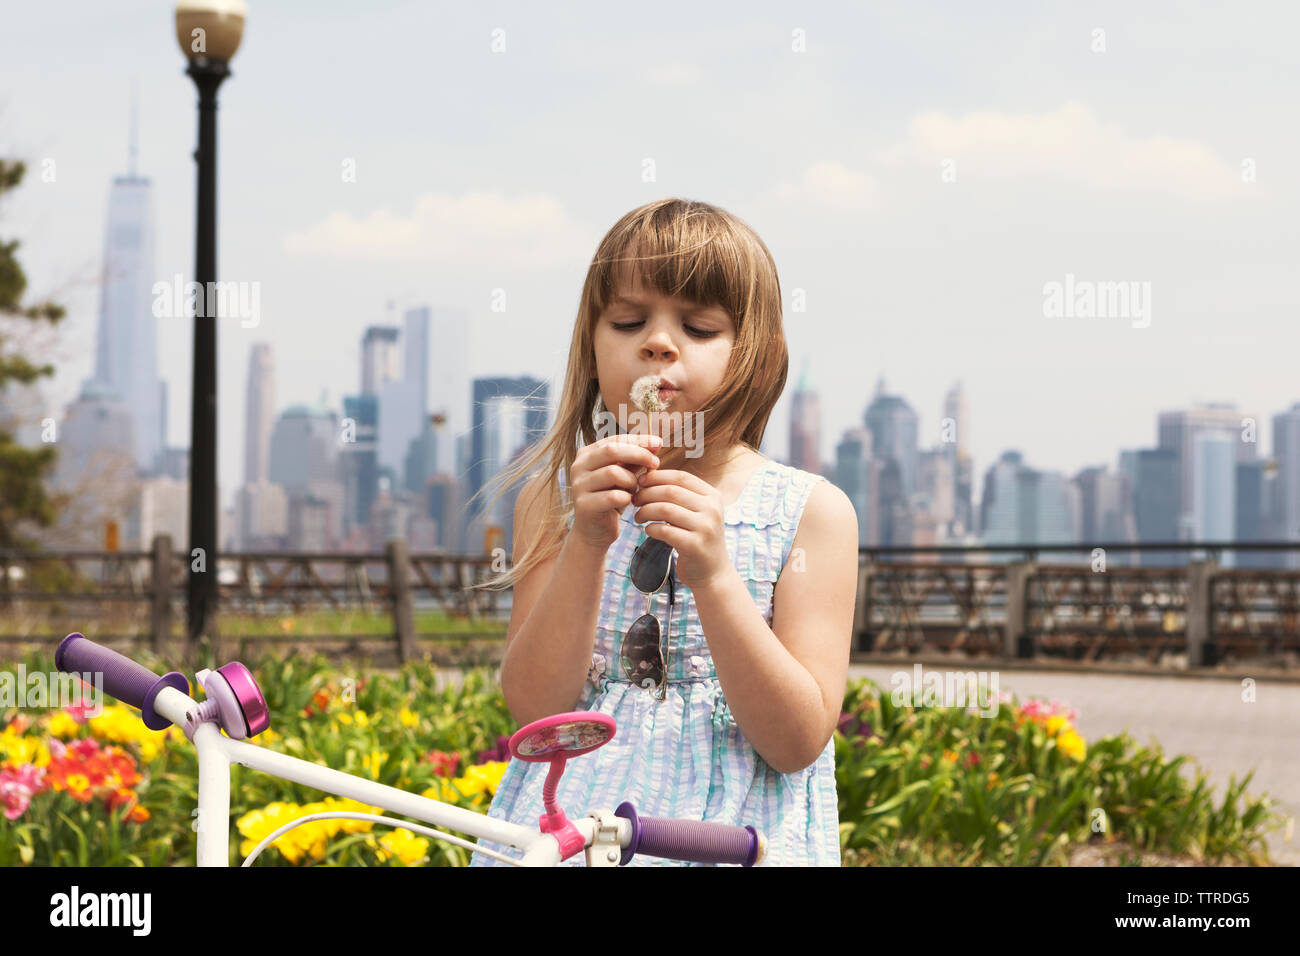 Cute girl blowing dandelion on promenade with city skyline in background Stock Photo